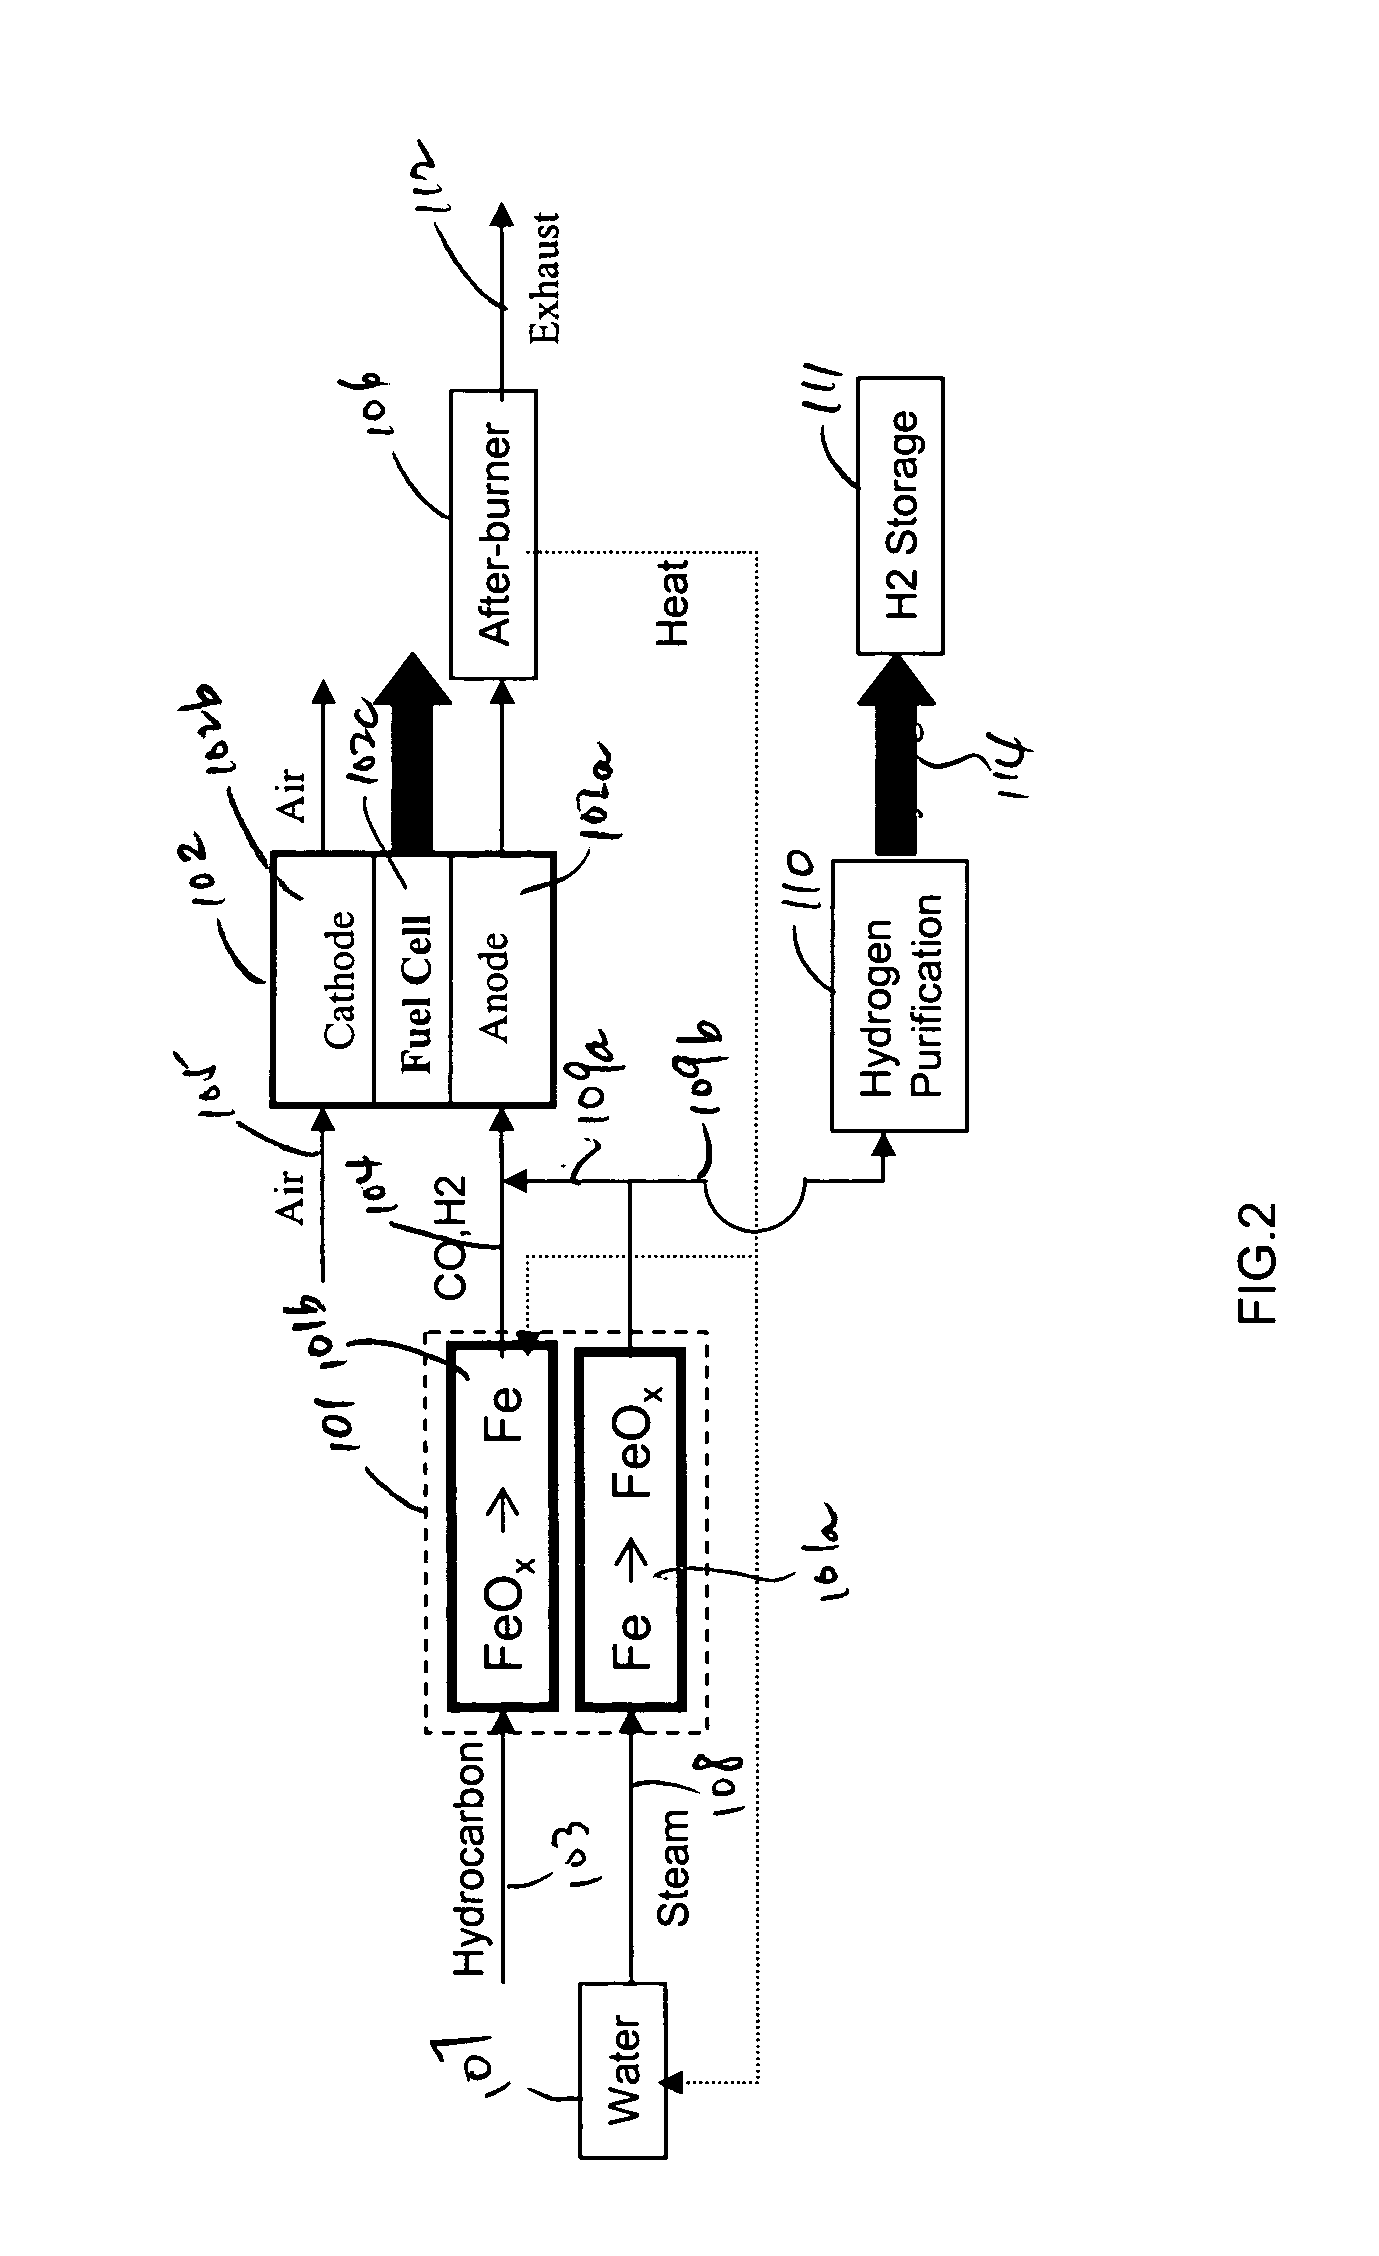 Method for hydrogen and electricity production using steam-iron process and solid oxide fuel cells